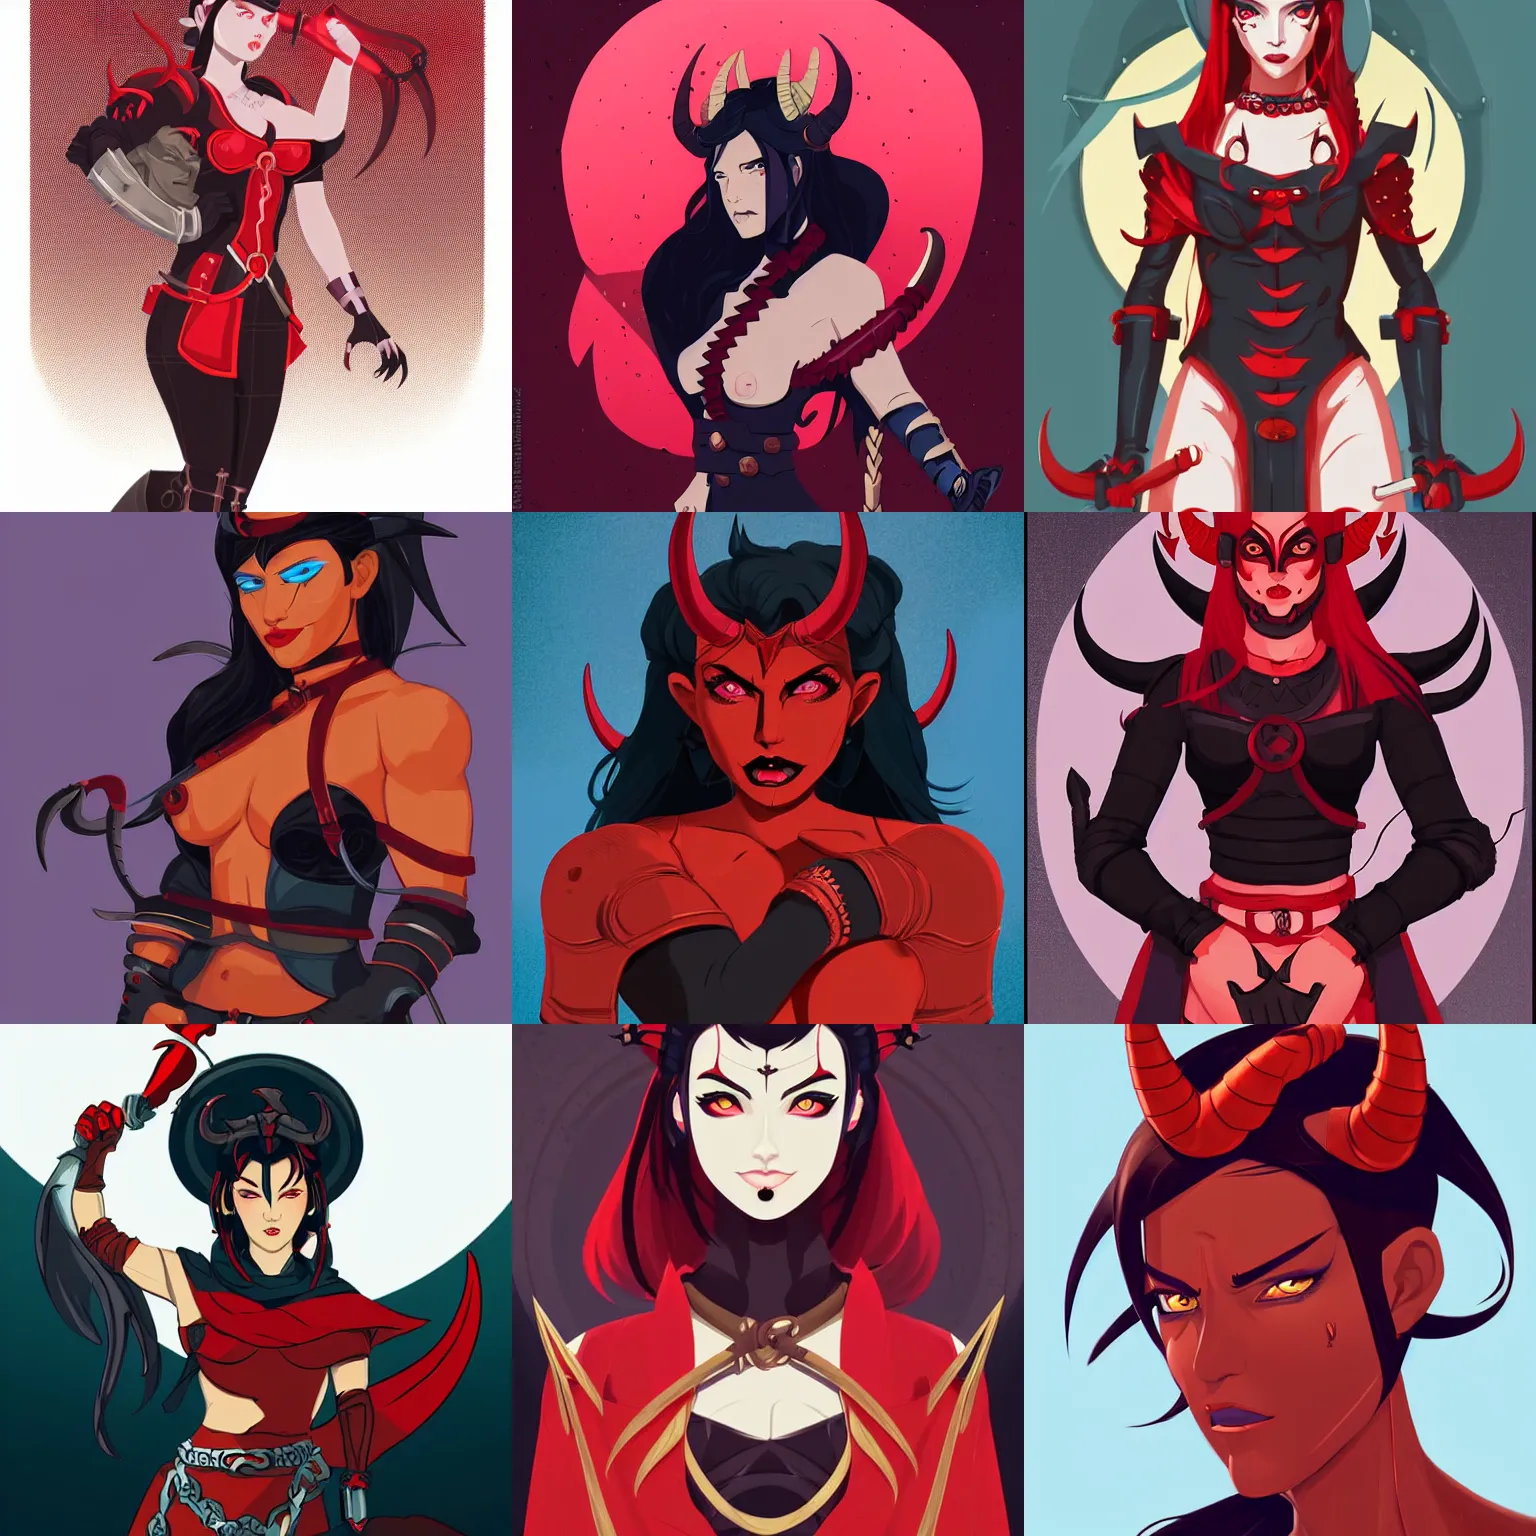 Prompt: portrait of an intimidating berber tiefling woman with red skin, devil horns and black hair wearing a steel chestplate, clean cel shaded vector art. shutterstock. behance hd by lois van baarle, artgerm, helen huang, by makoto shinkai and ilya kuvshinov, rossdraws, illustration